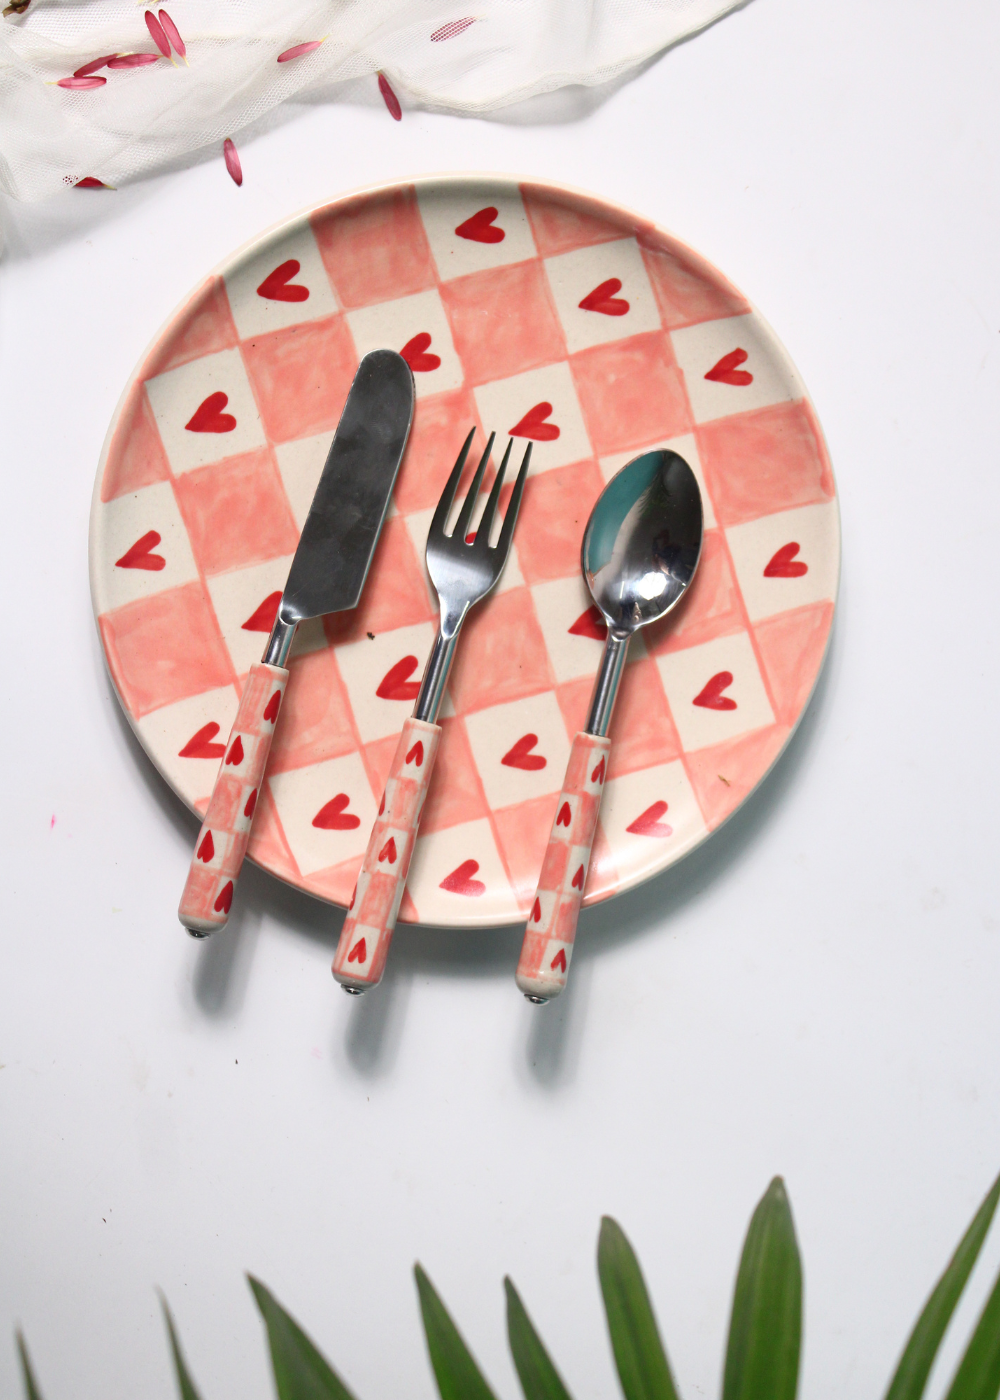 Chequered heart cutlery on plate